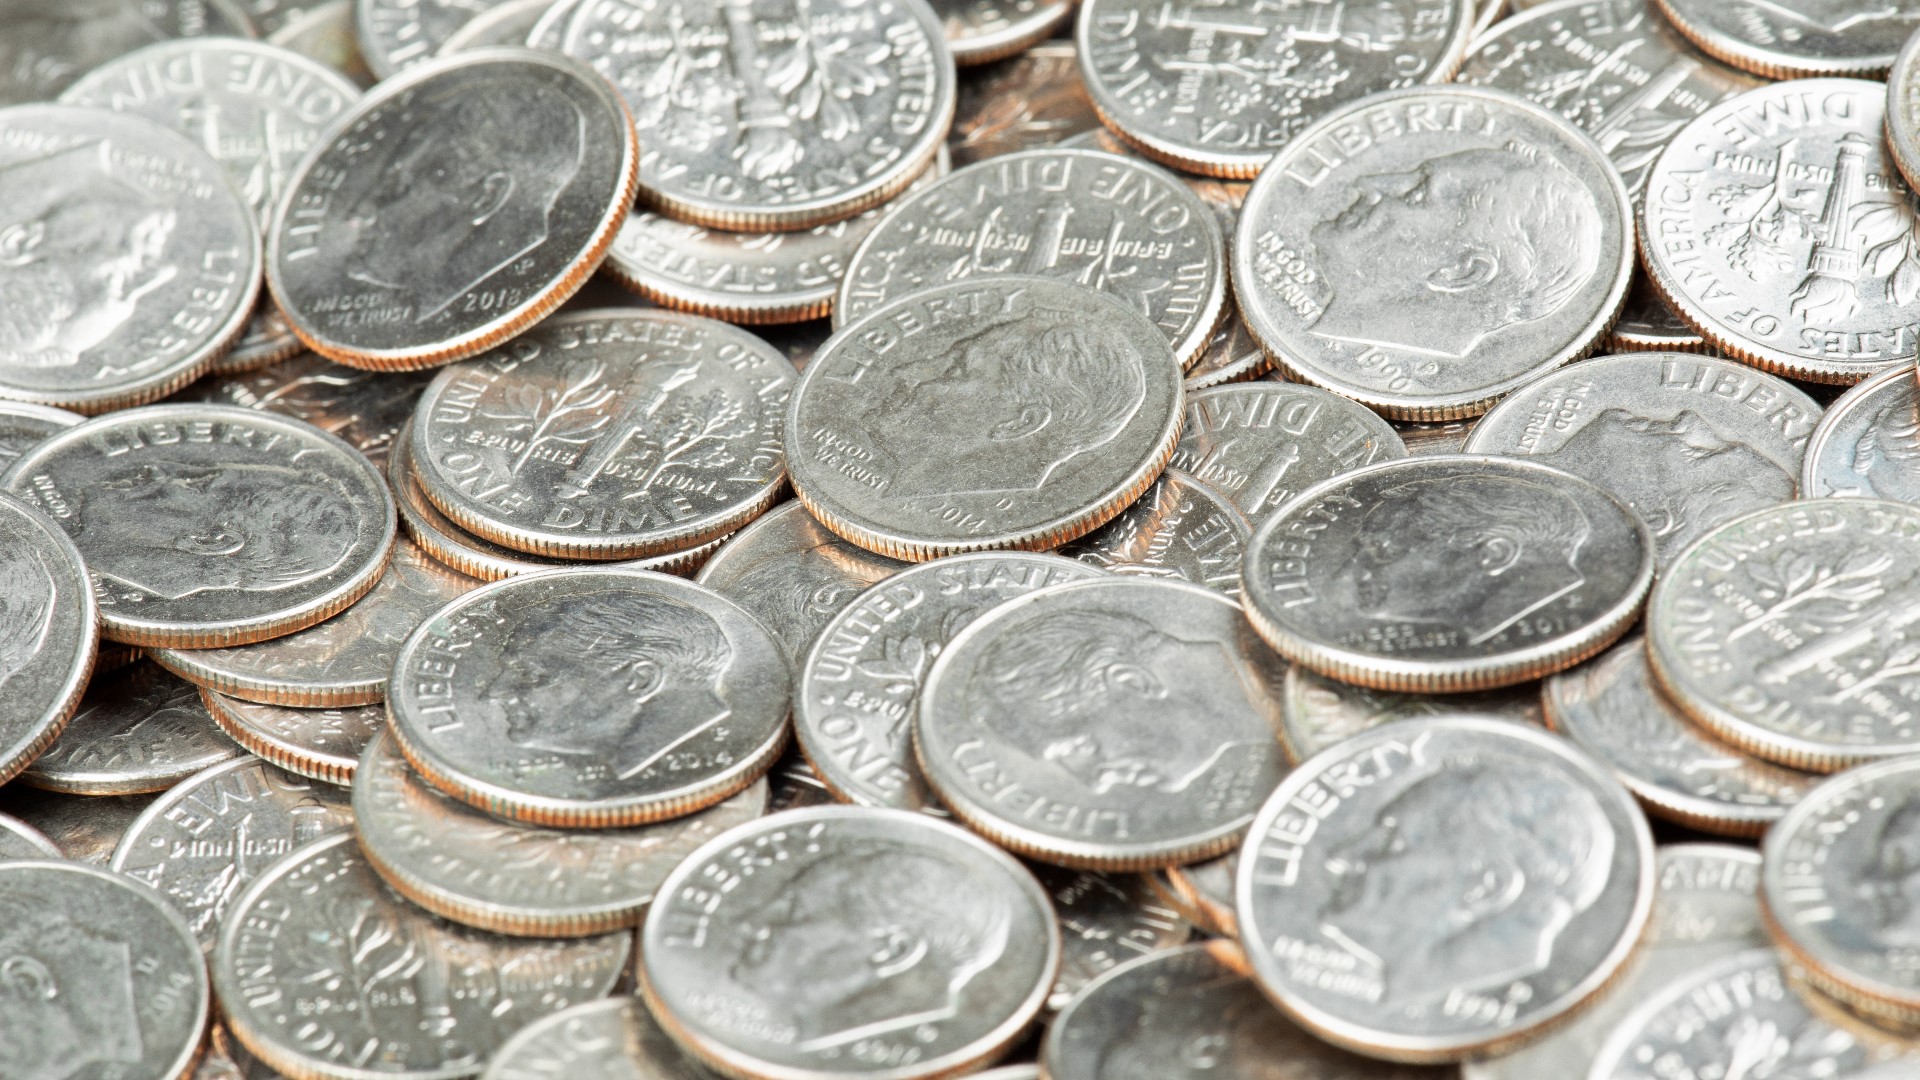 Thieves broke into a truck carrying $750,000 in dimes from the U.S. Mint in Philadelphia.